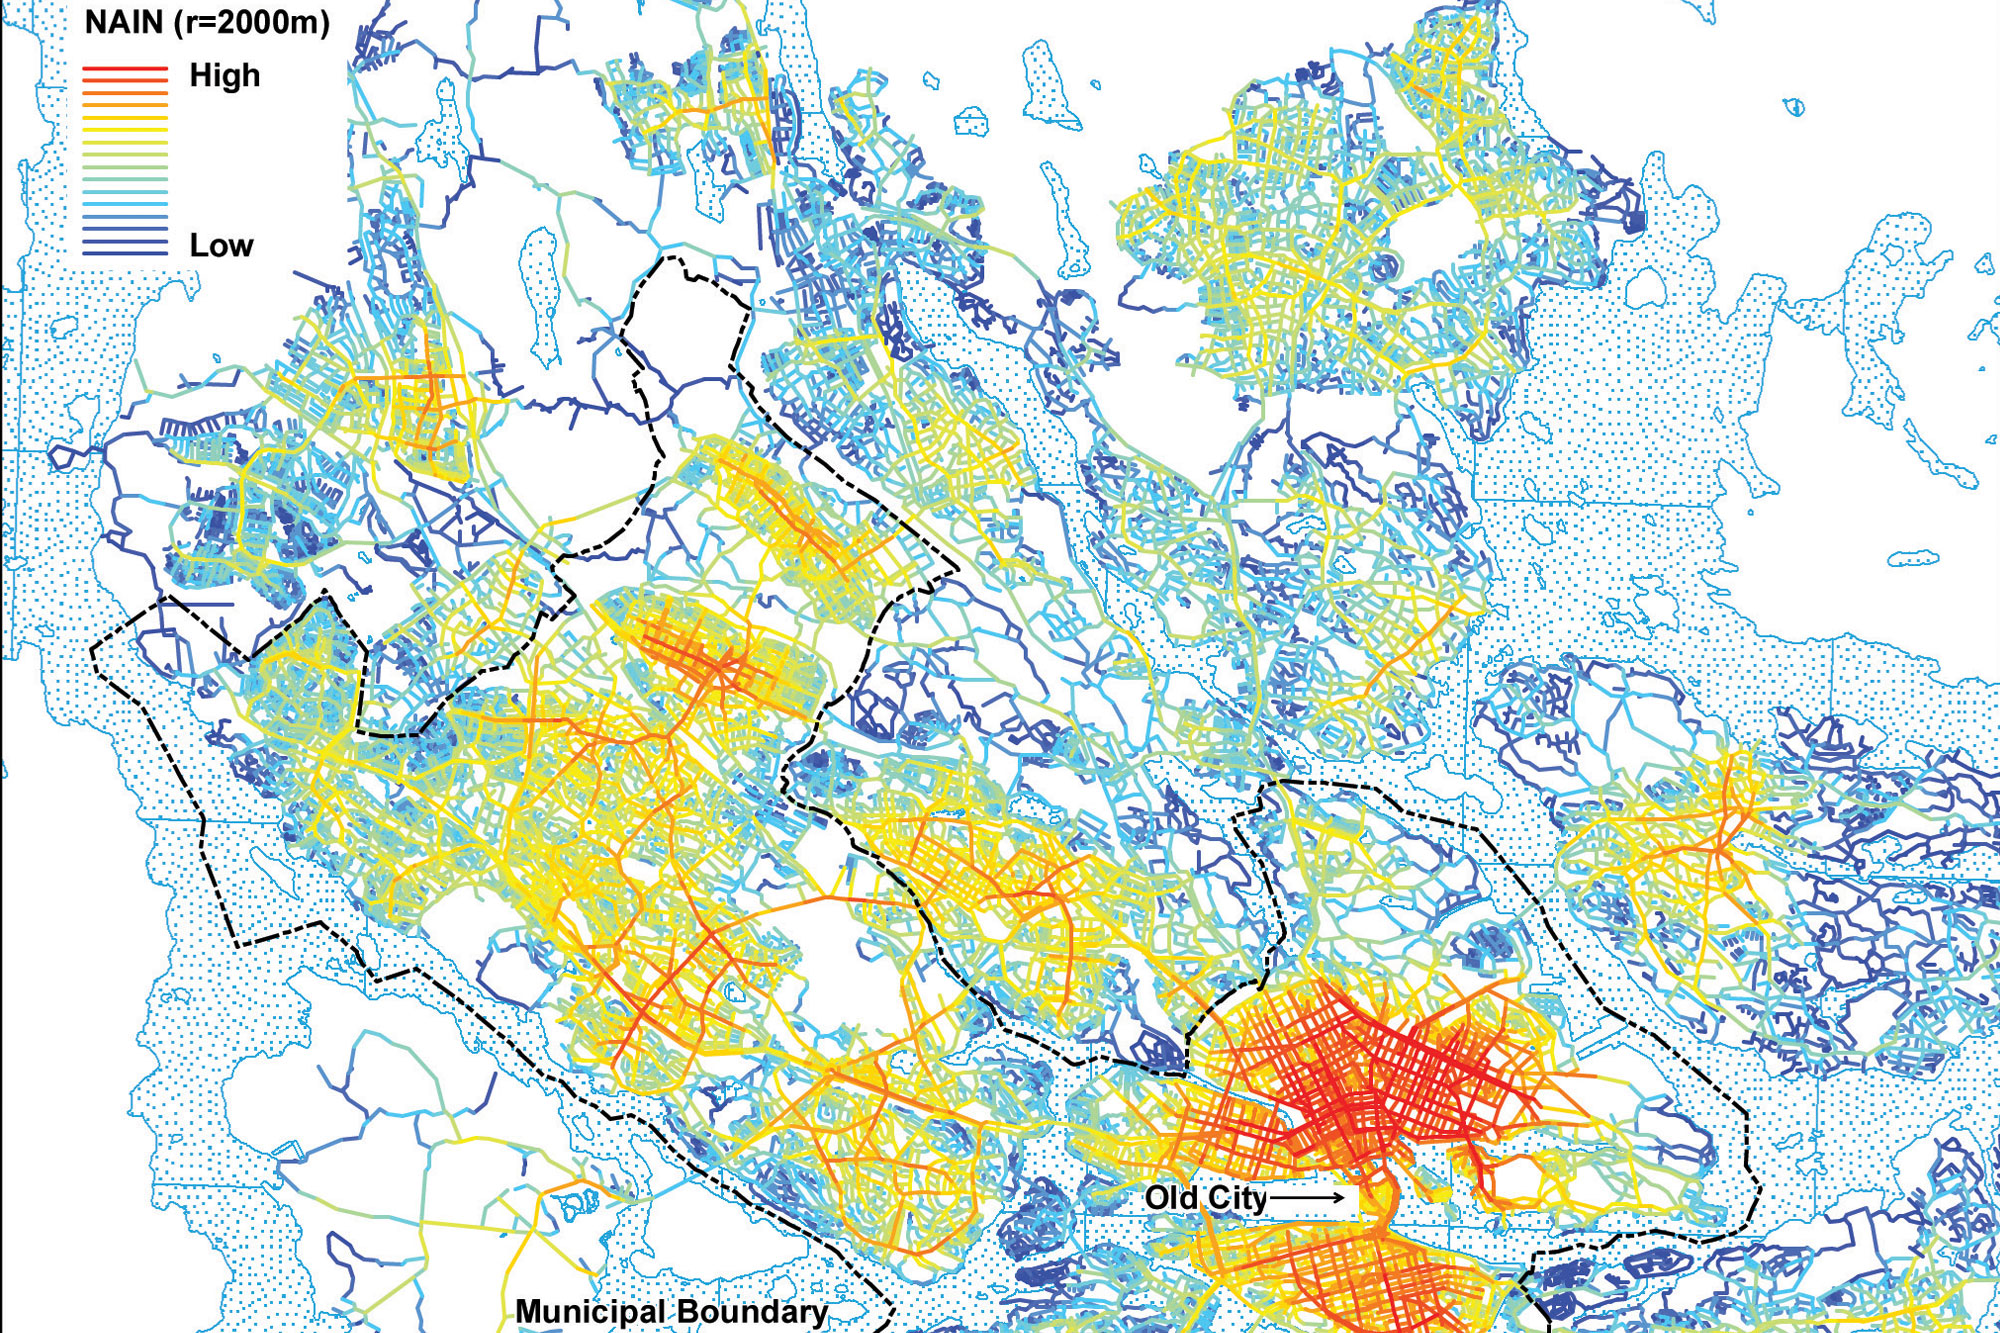 Space Syntax analysis of Stockholm’s spatial structure